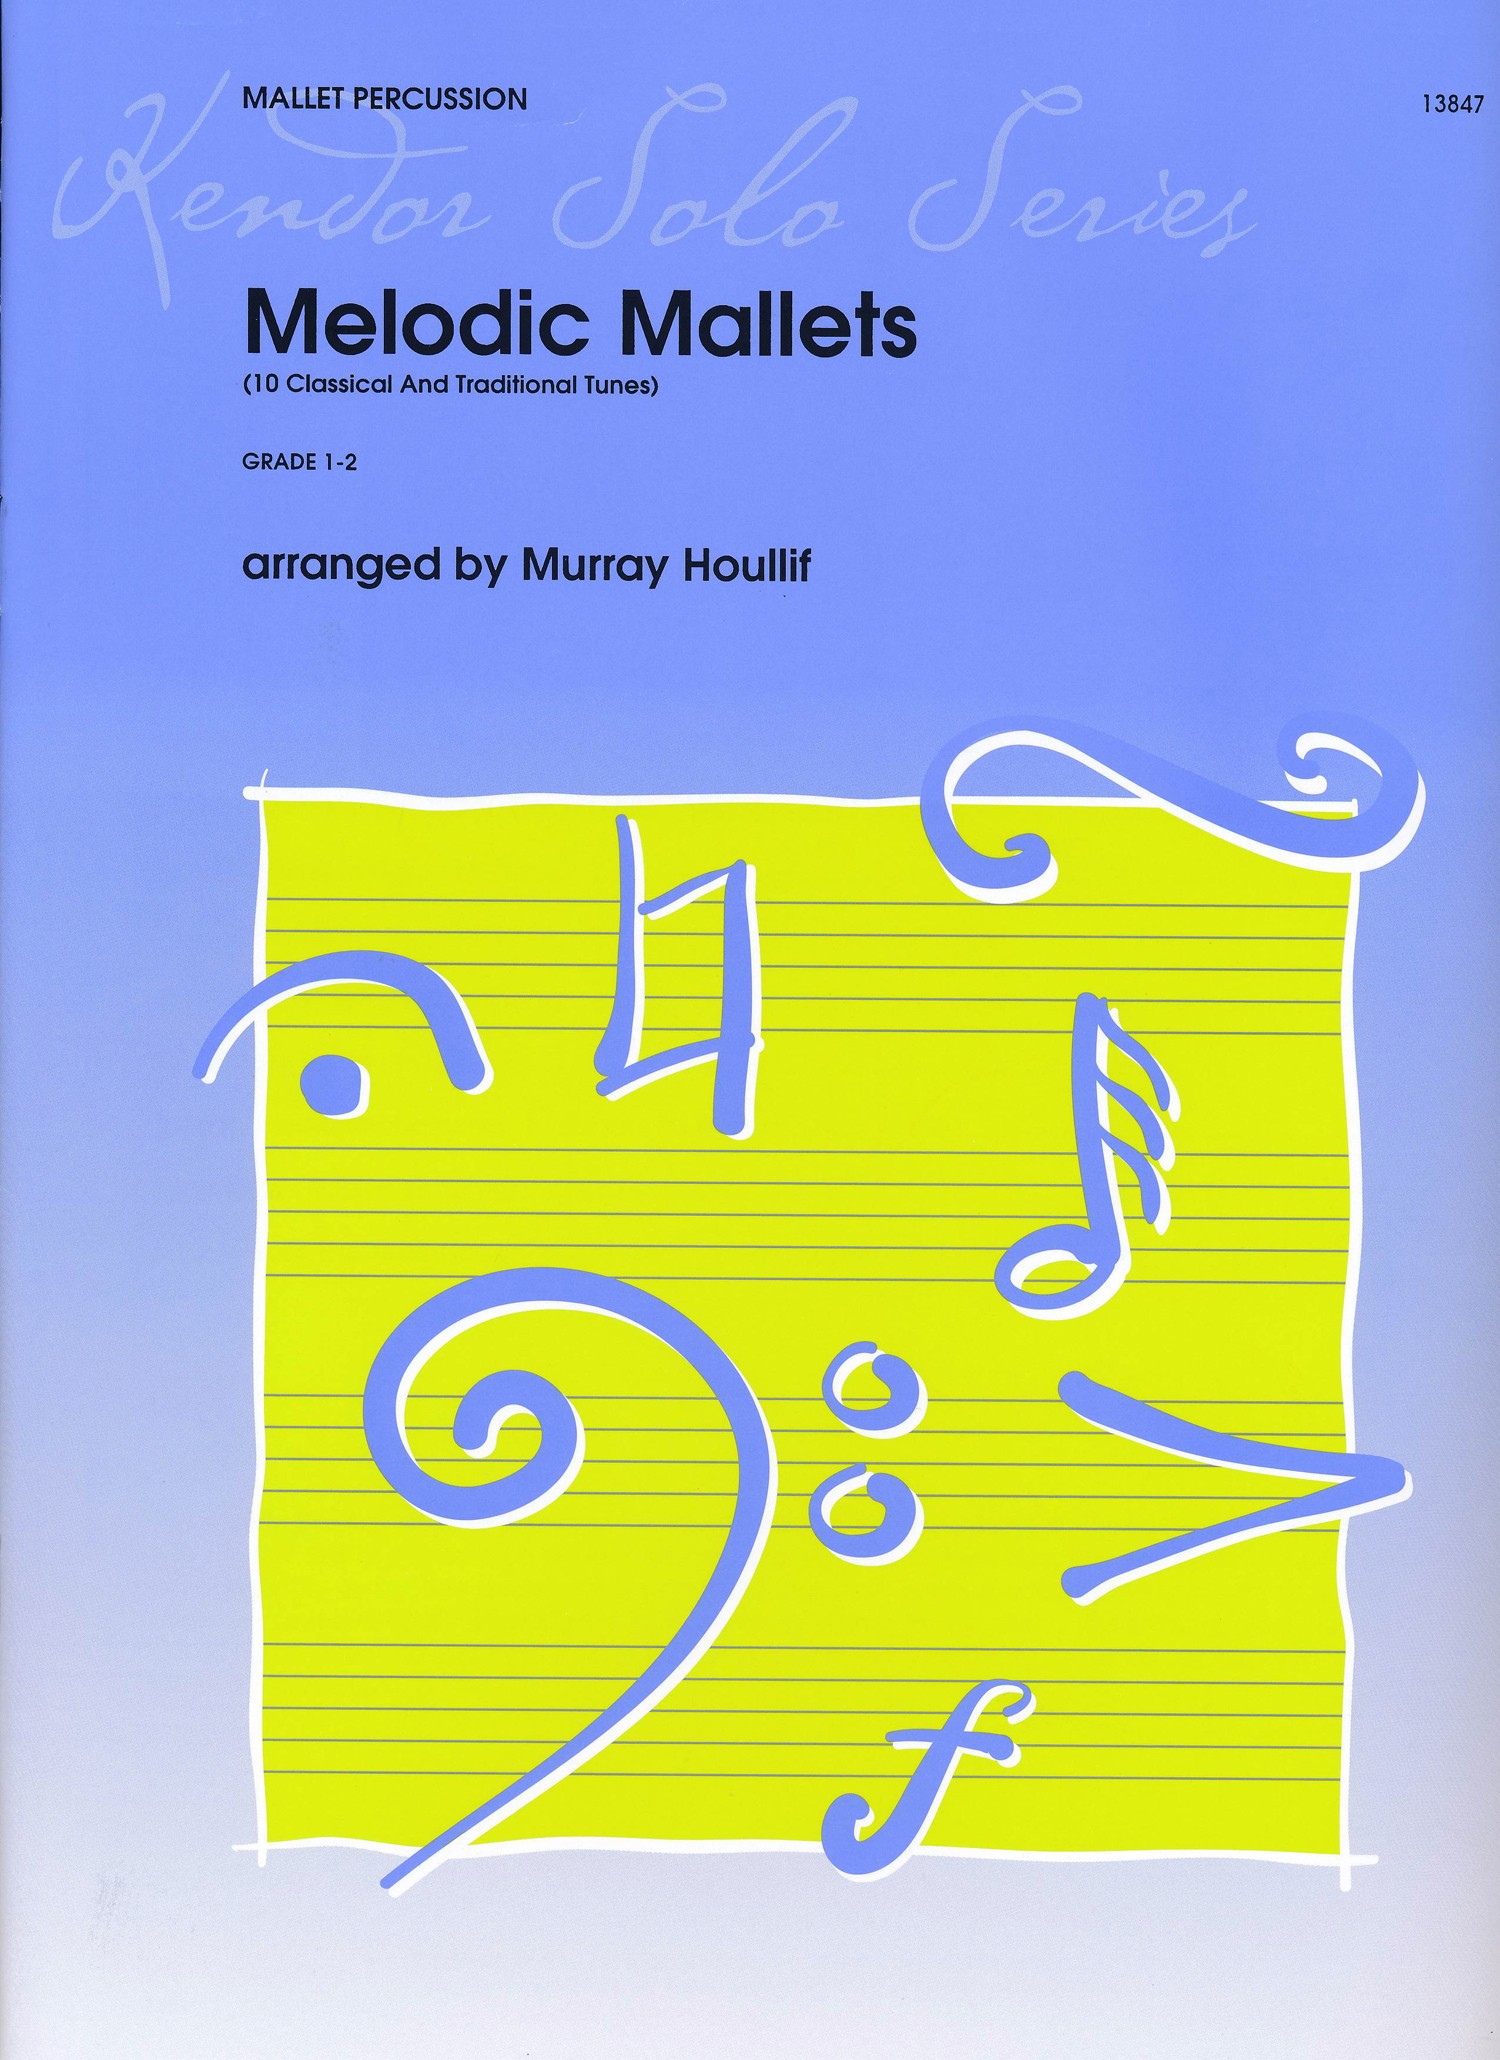 Melodic Mallets (10 Classical And Traditional Tunes)